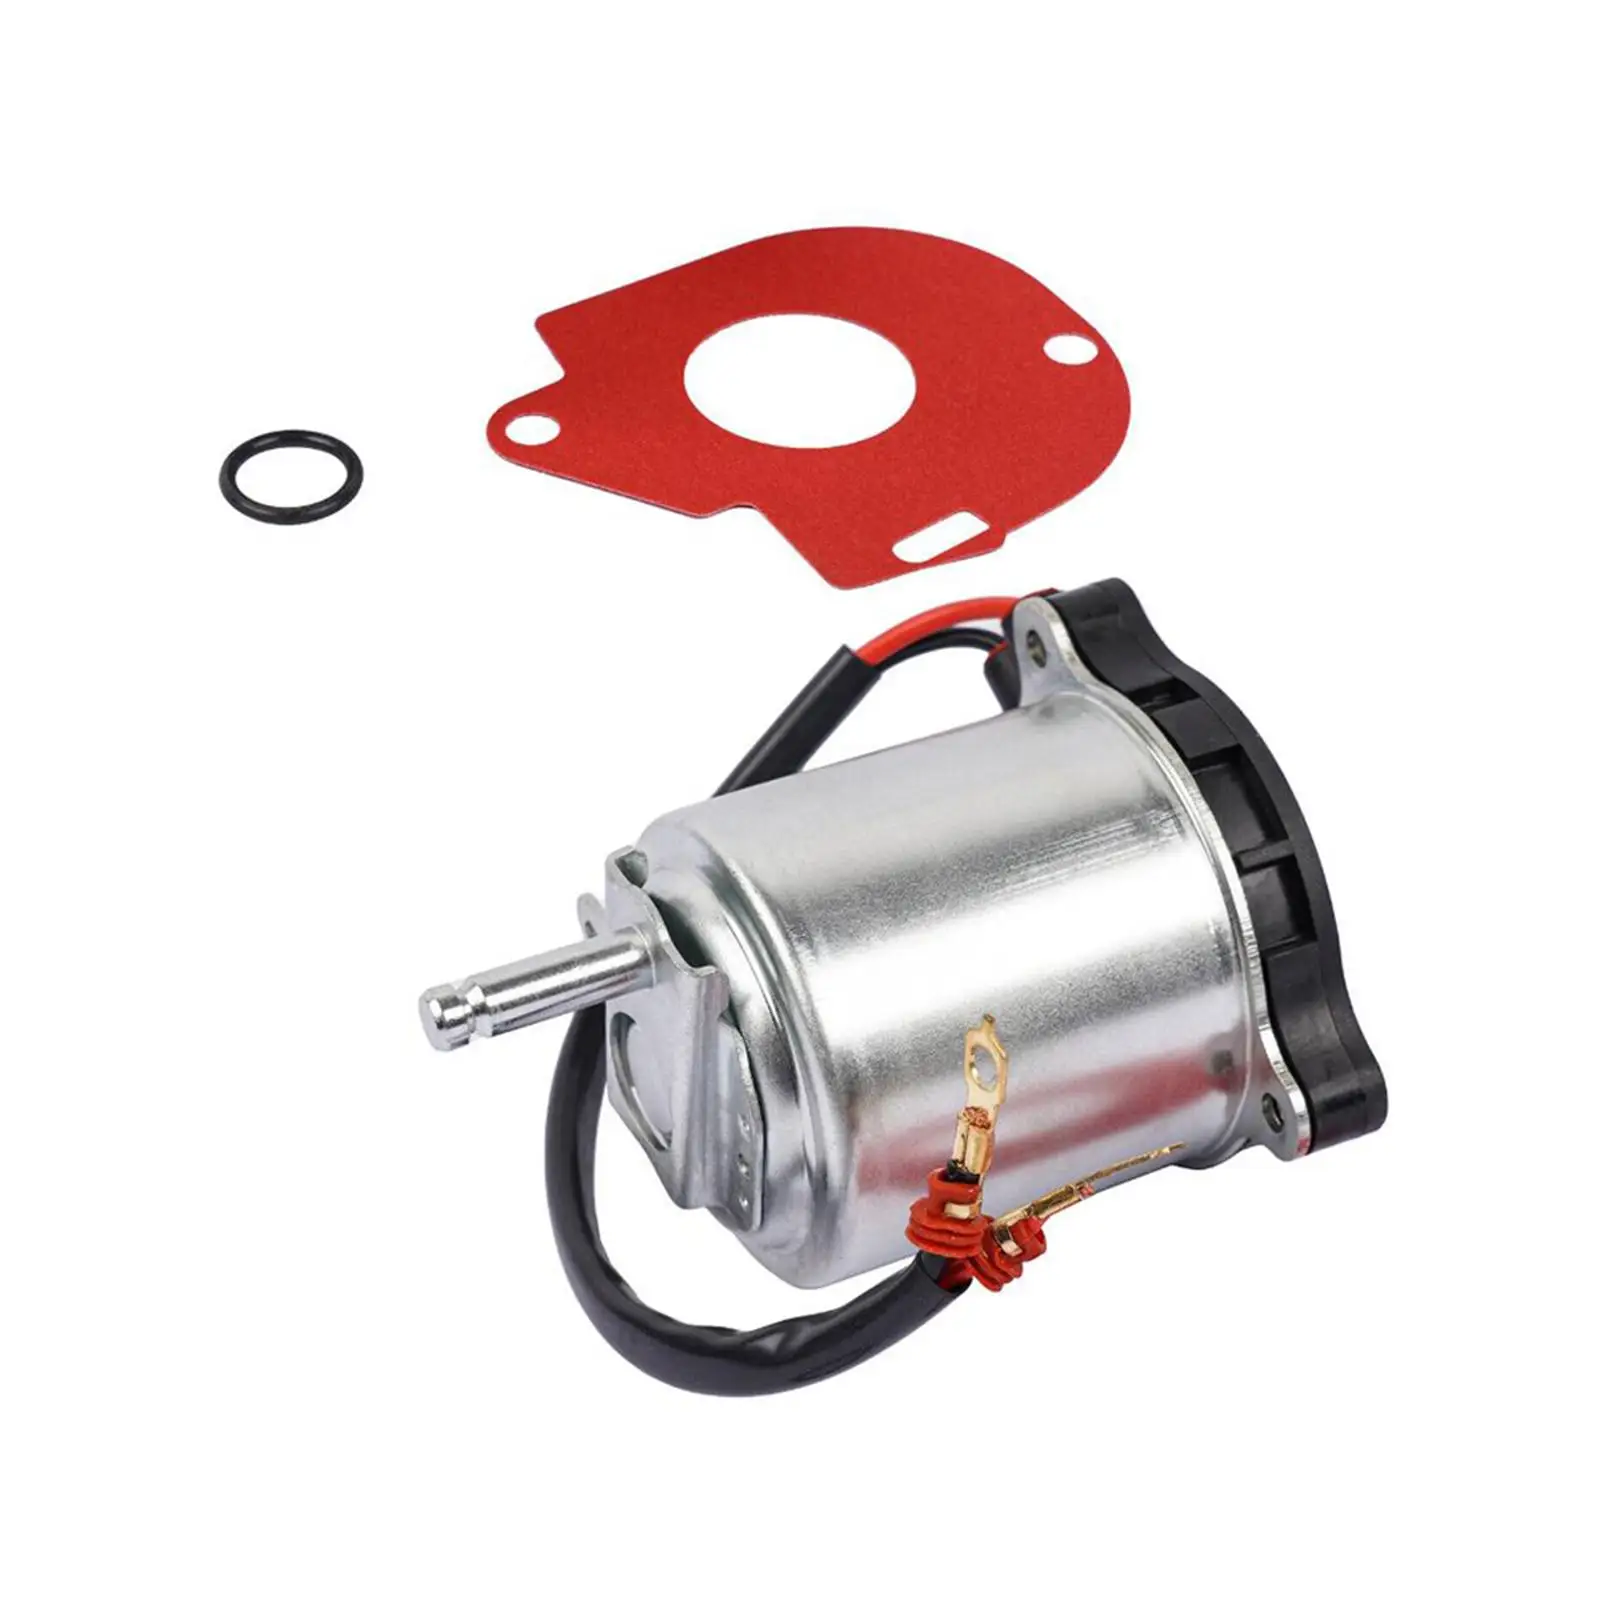 ABS Brake Booster Pump Motor 47960 60050 Directly Replace High Performance for Toyota LX450D FJ Cruiser LX570 for land cruiser